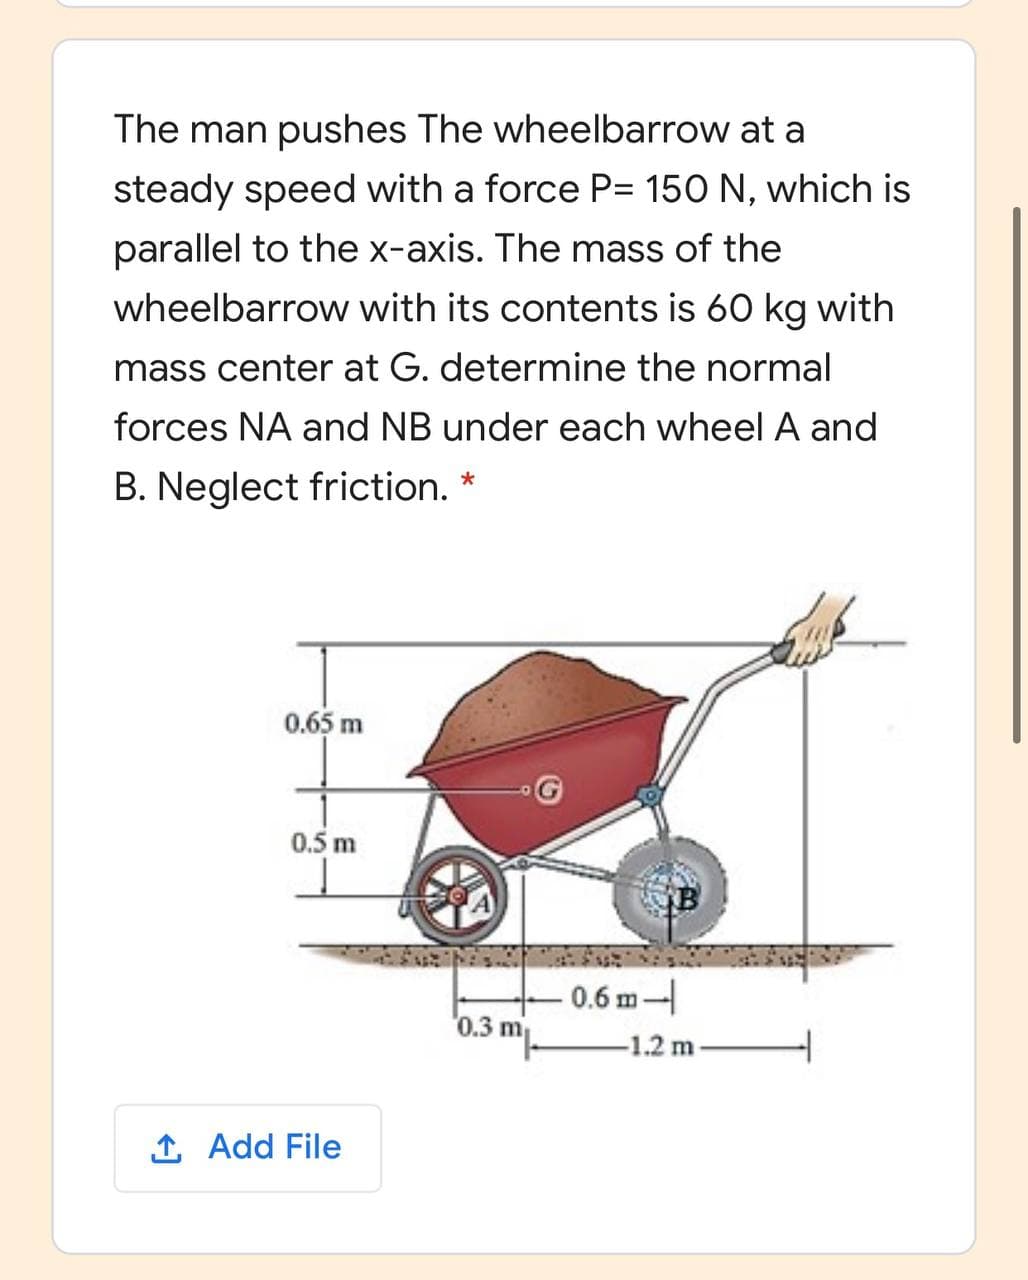 The man pushes The wheelbarrow at a
steady speed with a force P= 150 N, which is
parallel to the x-axis. The mass of the
wheelbarrow with its contents is 60 kg with
mass center at G. determine the normal
forces NA and NB under each wheel A and
B. Neglect friction. *
0.65 m
0.5 m
0.6 m-
'0.3 m
-1.2 m-
1 Add File
